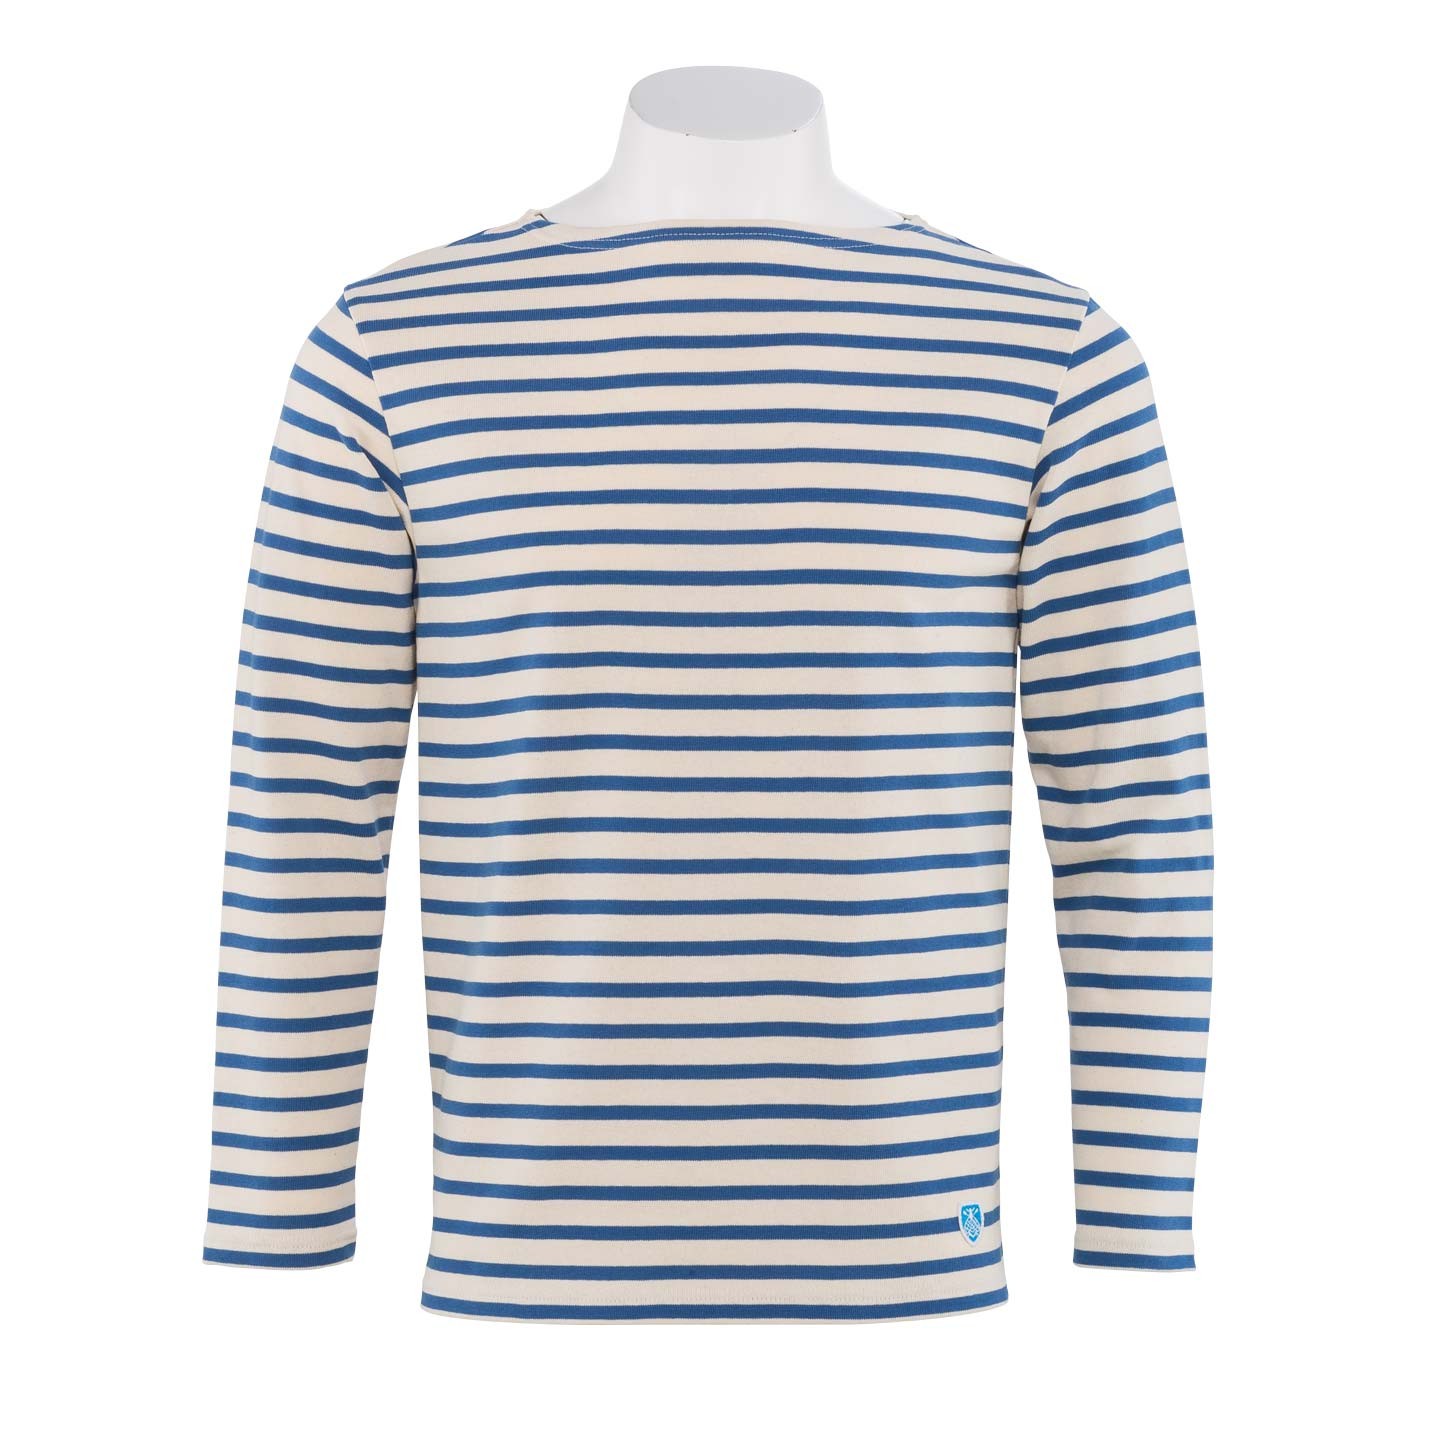 Striped shirt Écru / Indigo unisex 100% made in France Orcival